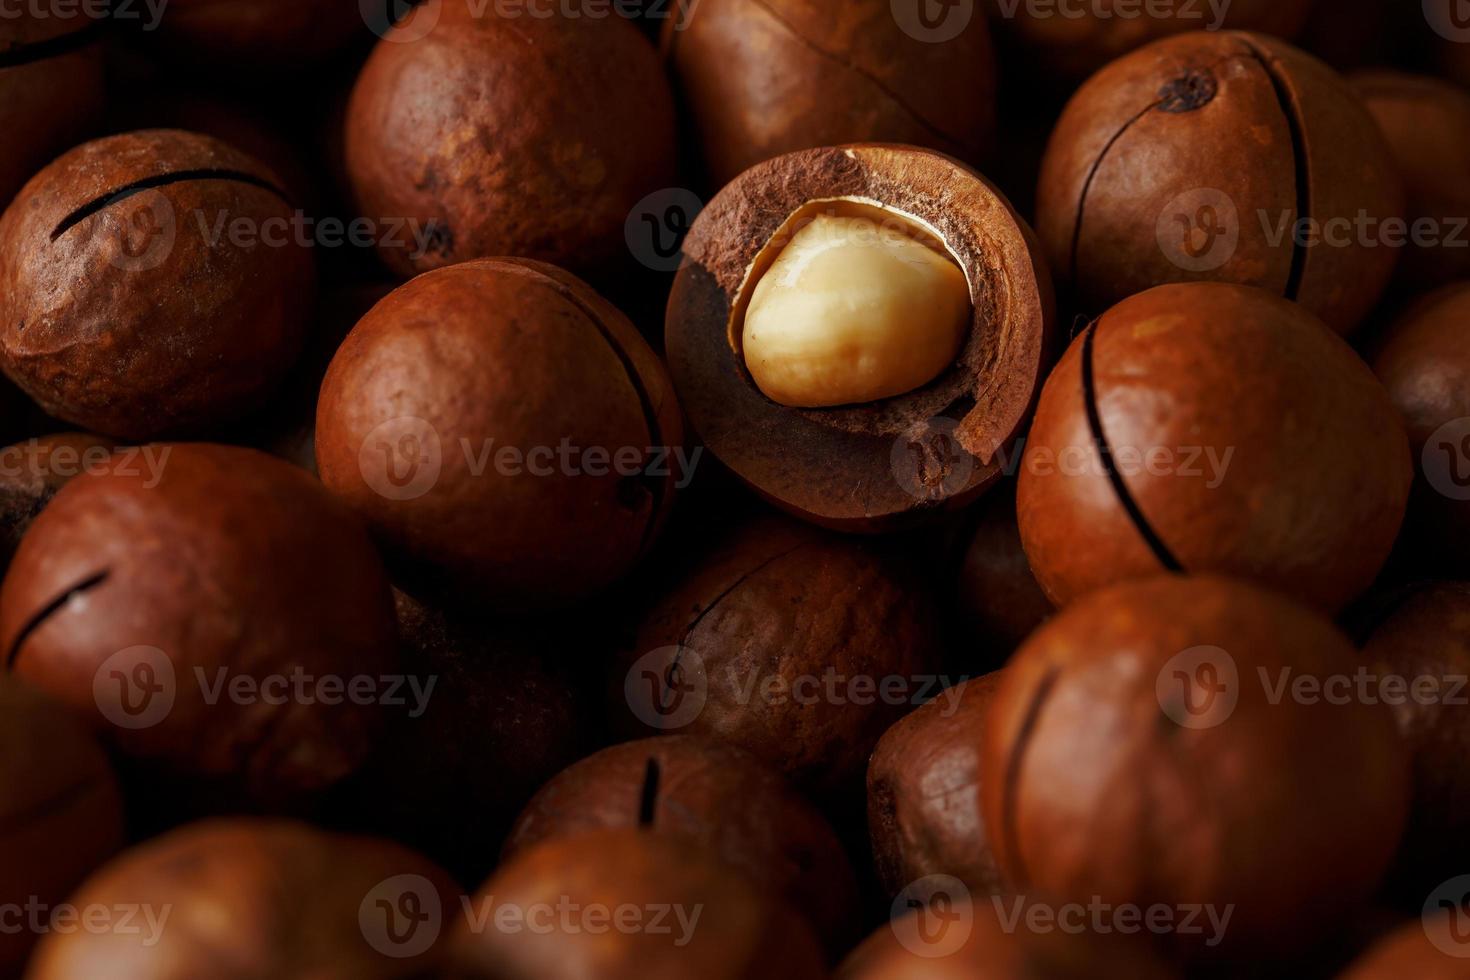 Texture of organic macadamia nut fresh natural fruit shelled one nut in full frame close-up view photo